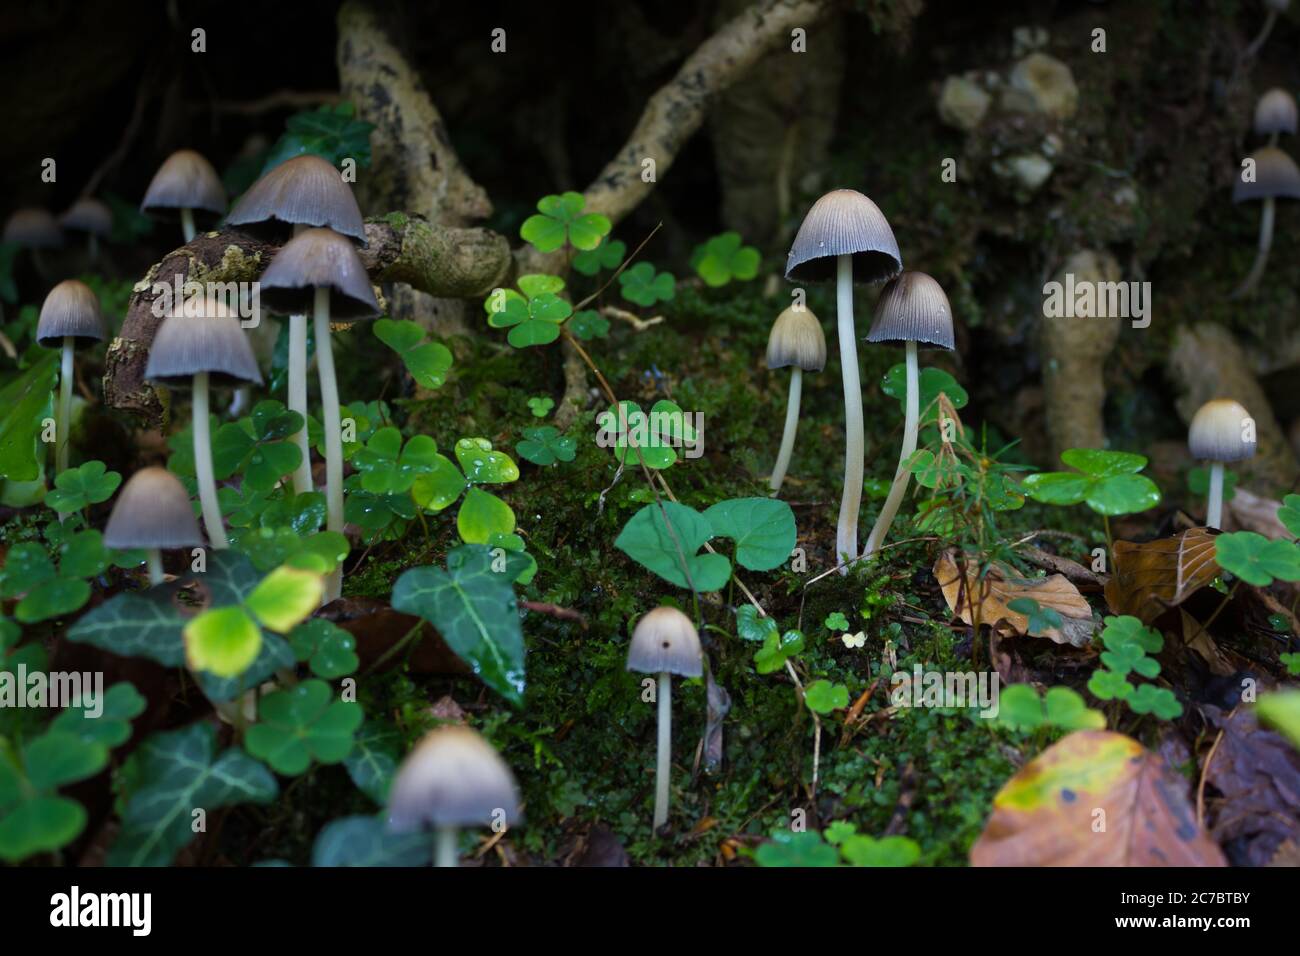 Group of mica cap mushrooms (Coprinellus micaceus) with several other plants at low angle Stock Photo